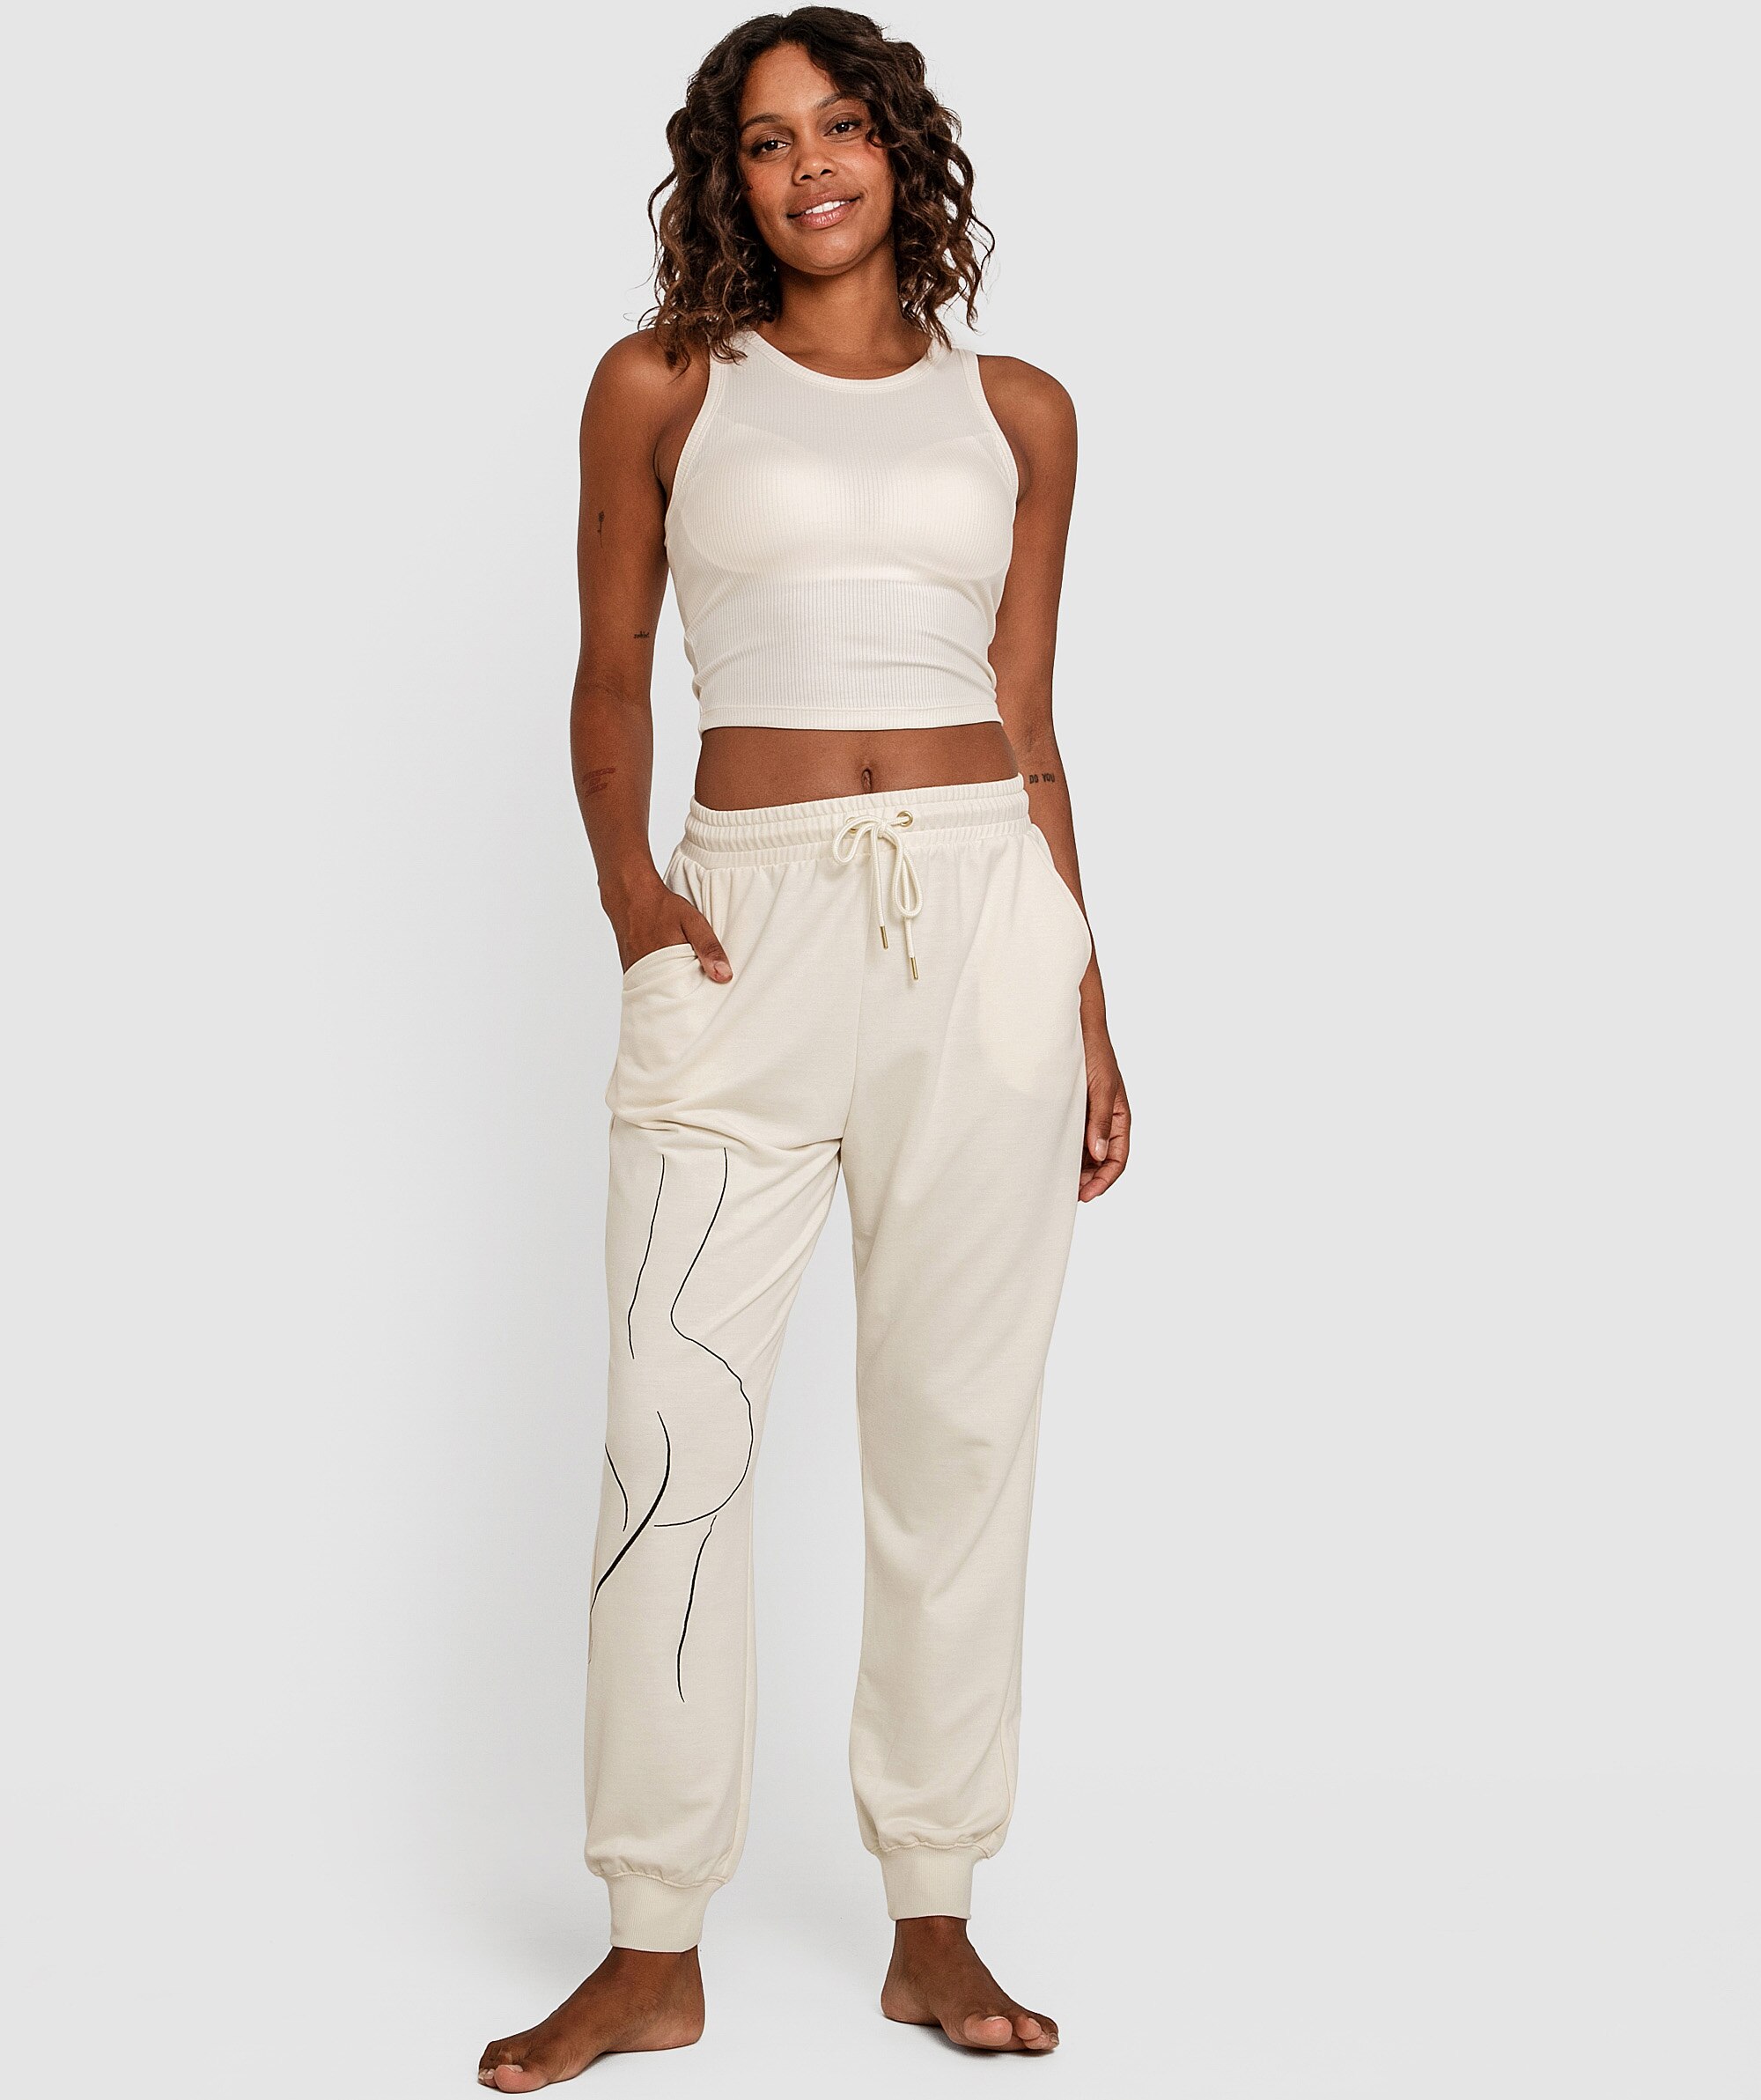 In The Nude Jogger Pant - Ivory